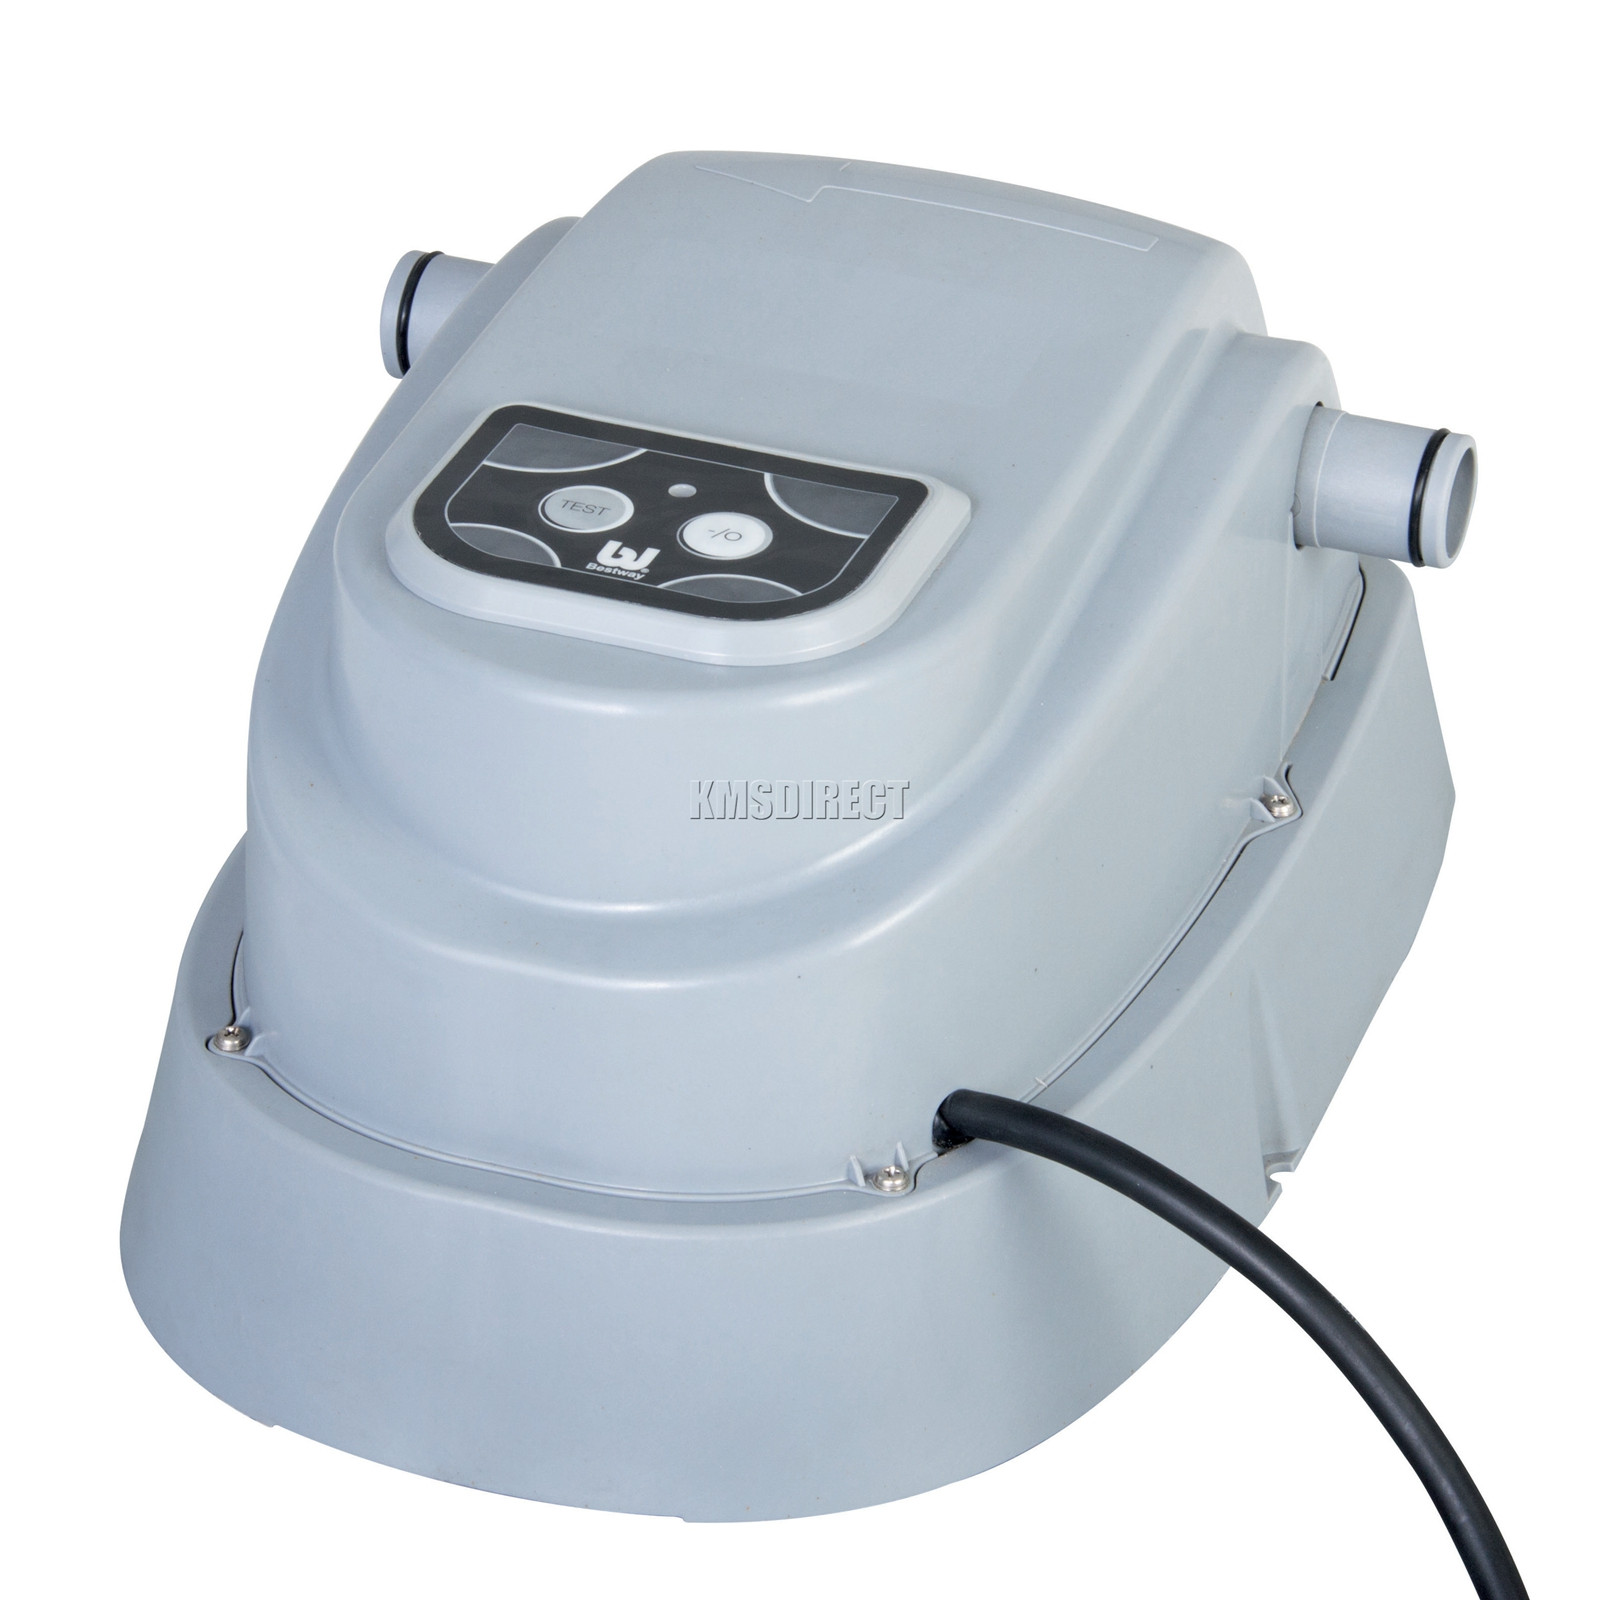 Above Ground Swimming Pool Heaters
 Bestway Electric Swimming Pool Heater Up to 15FT 2 8KW For